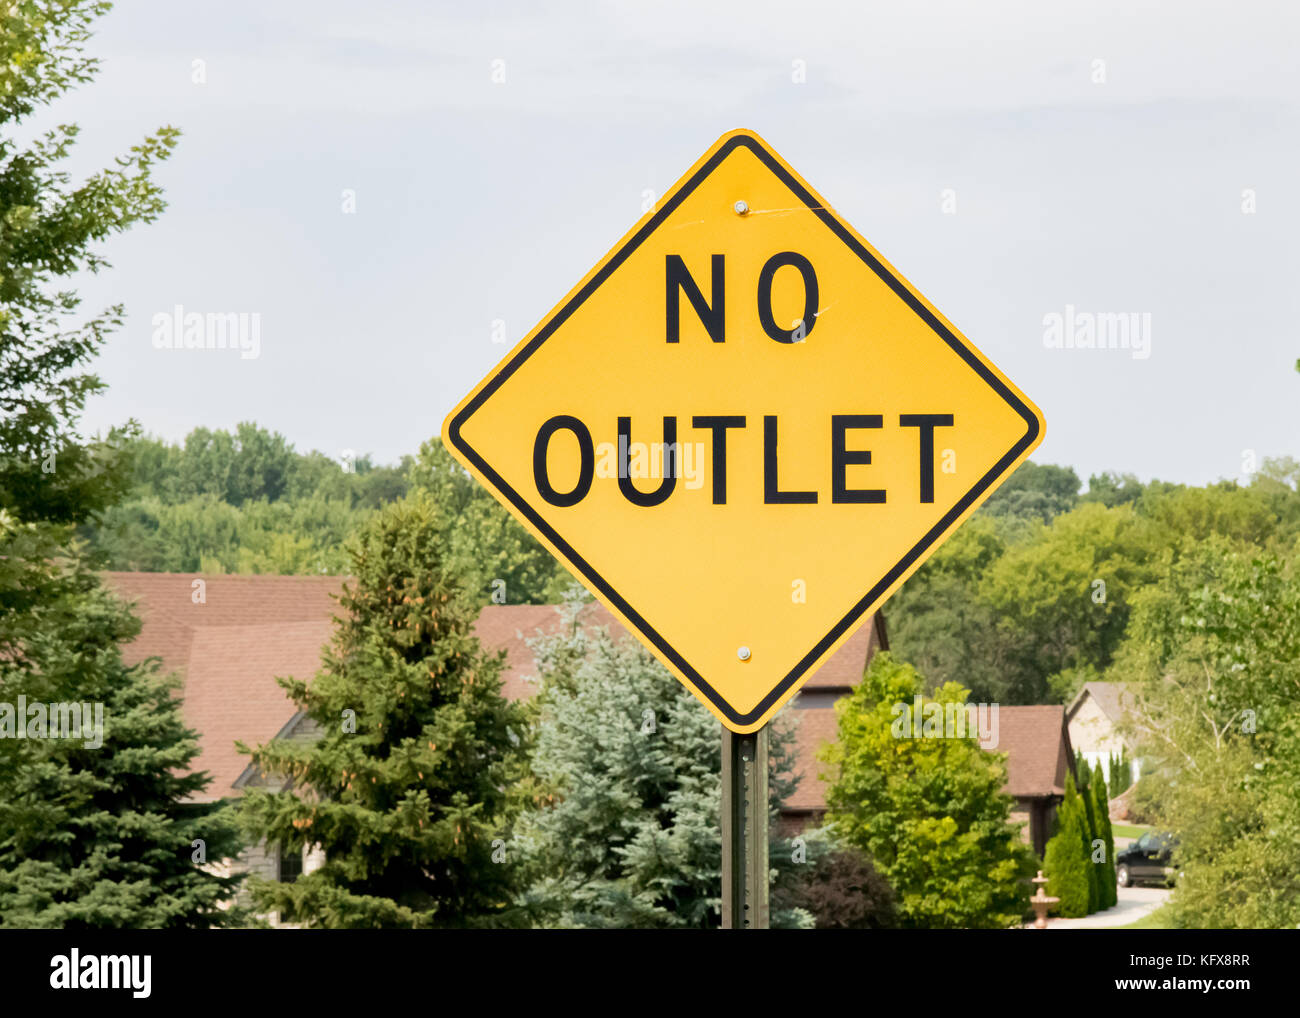 No Outlet street sign at entrance to a nice suburban neighborhood Stock Photo